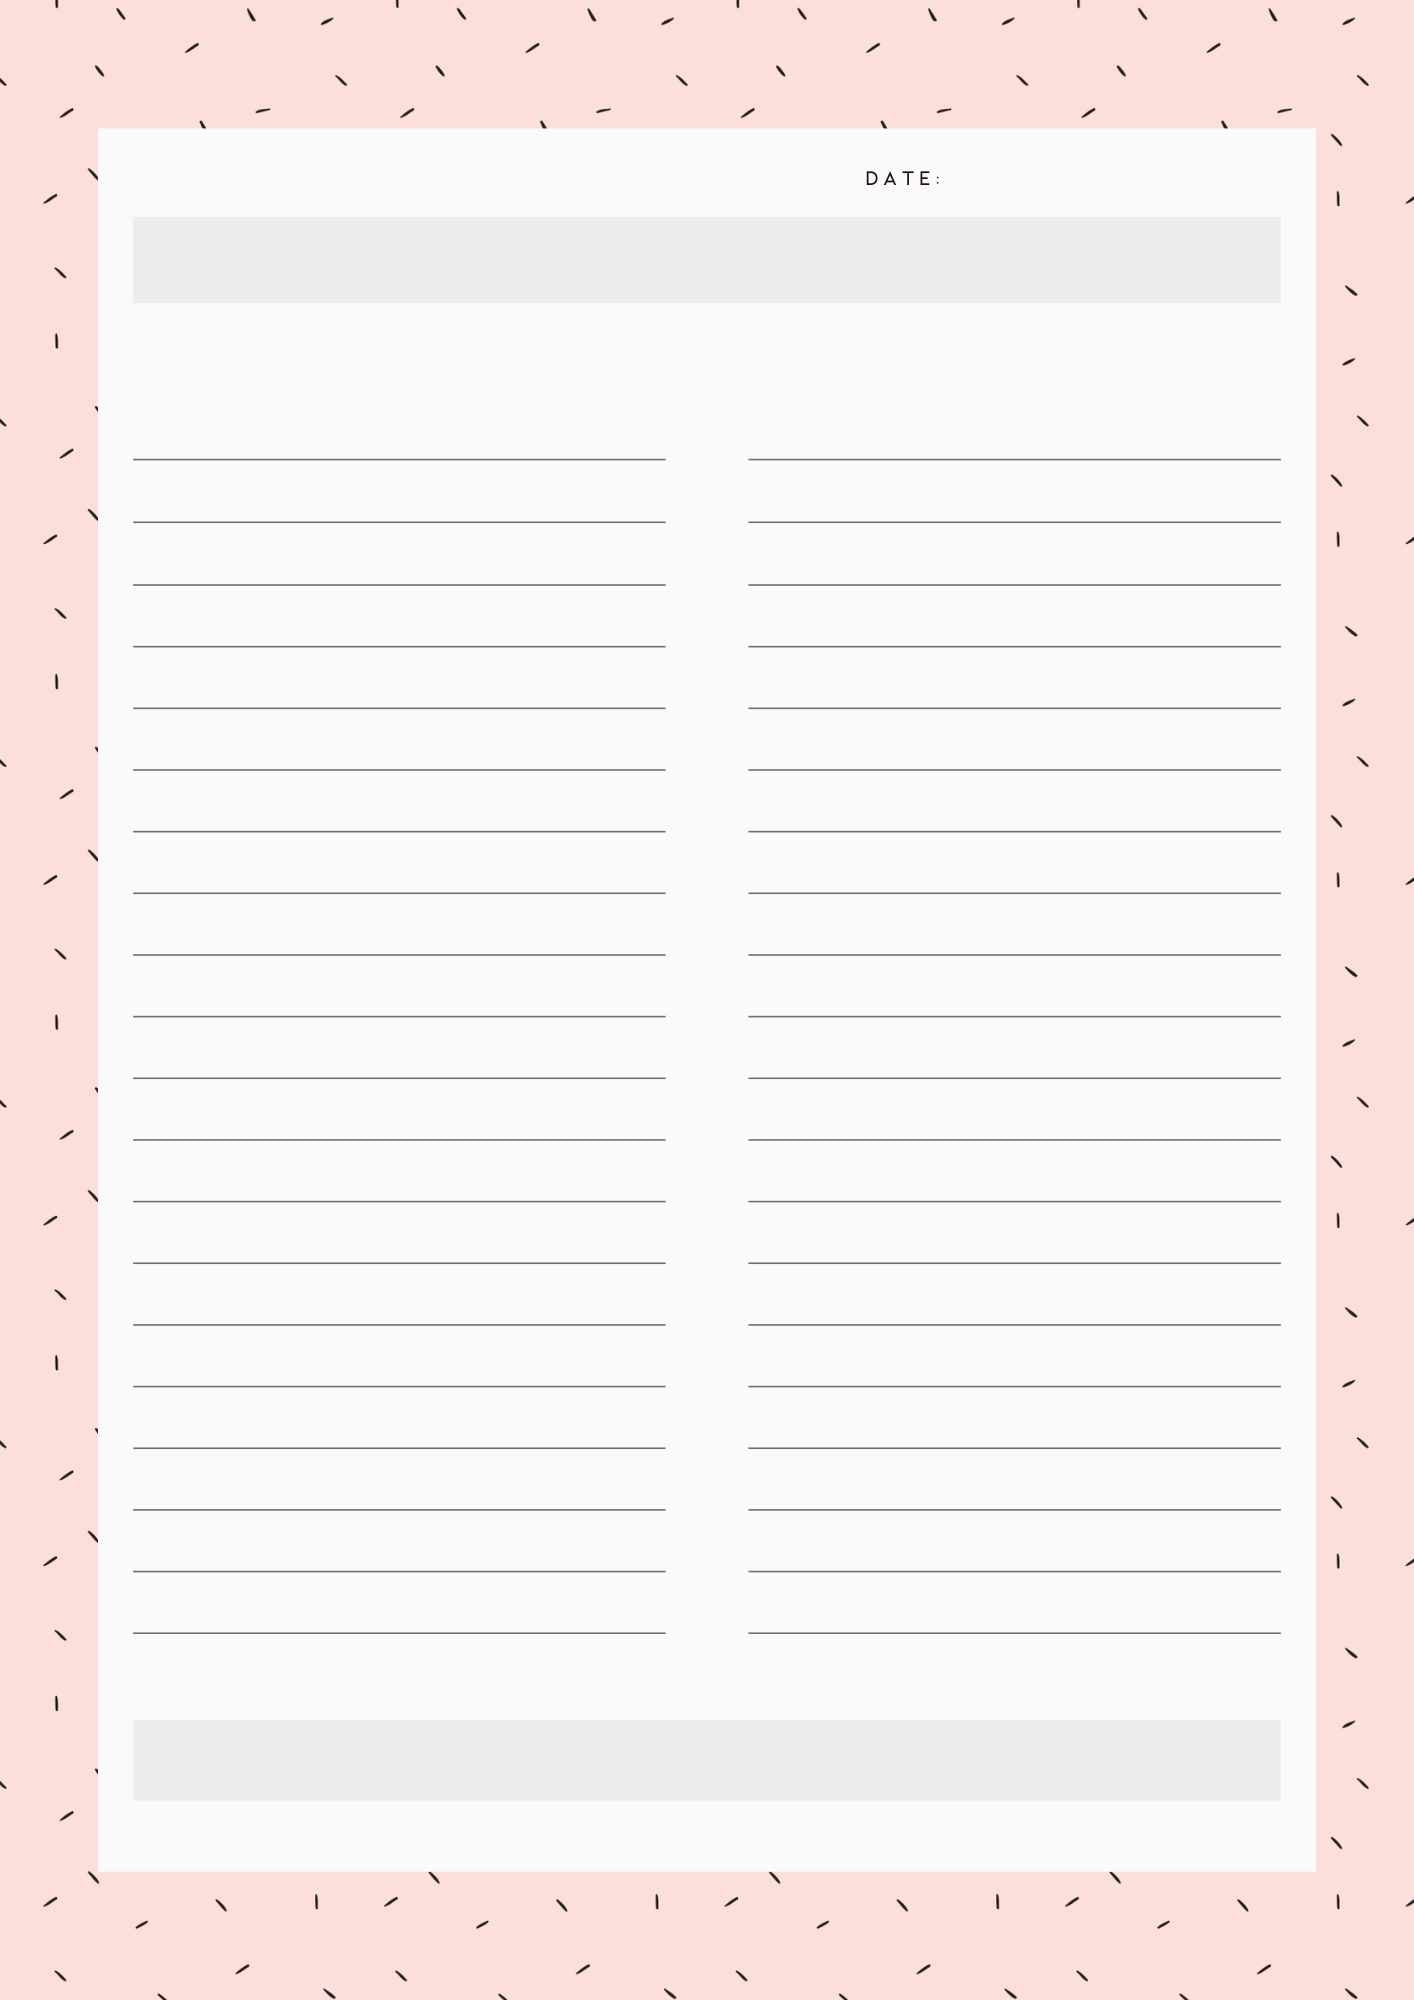 DIGITAL TEMPLATES: Study Notes Pack in 'Pretty in Pink'